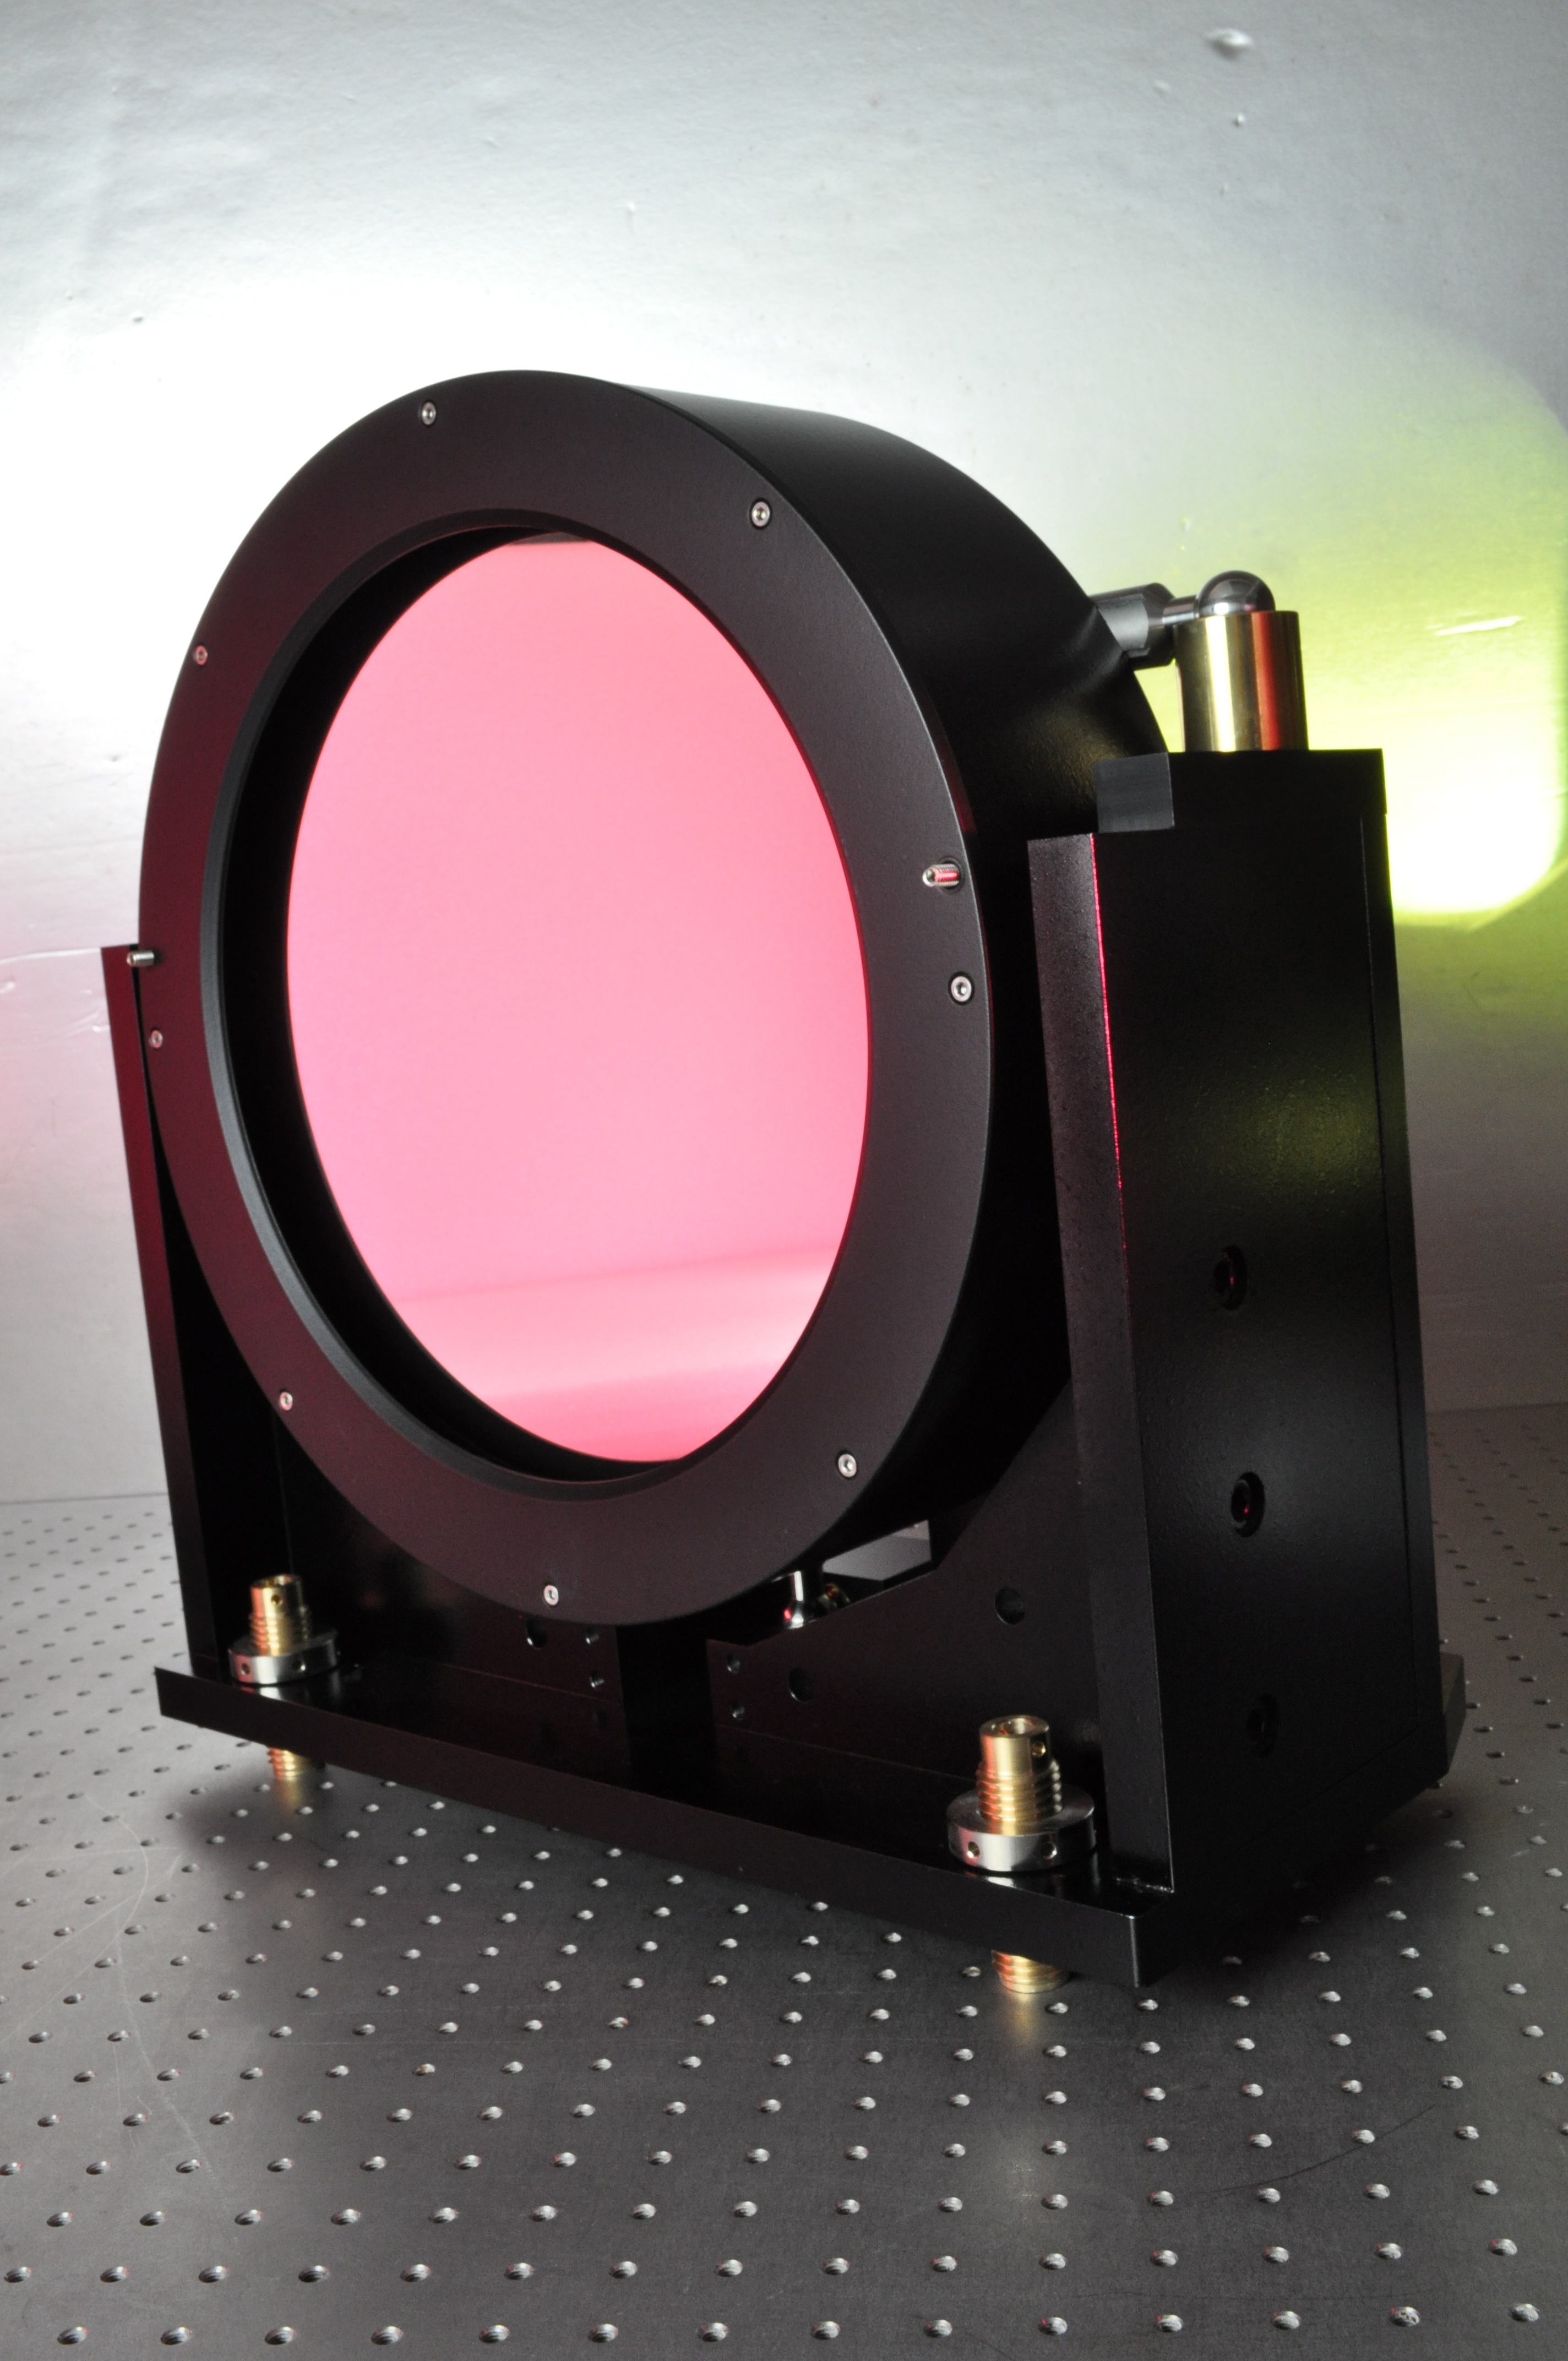 Key components for spaceborne optical systems